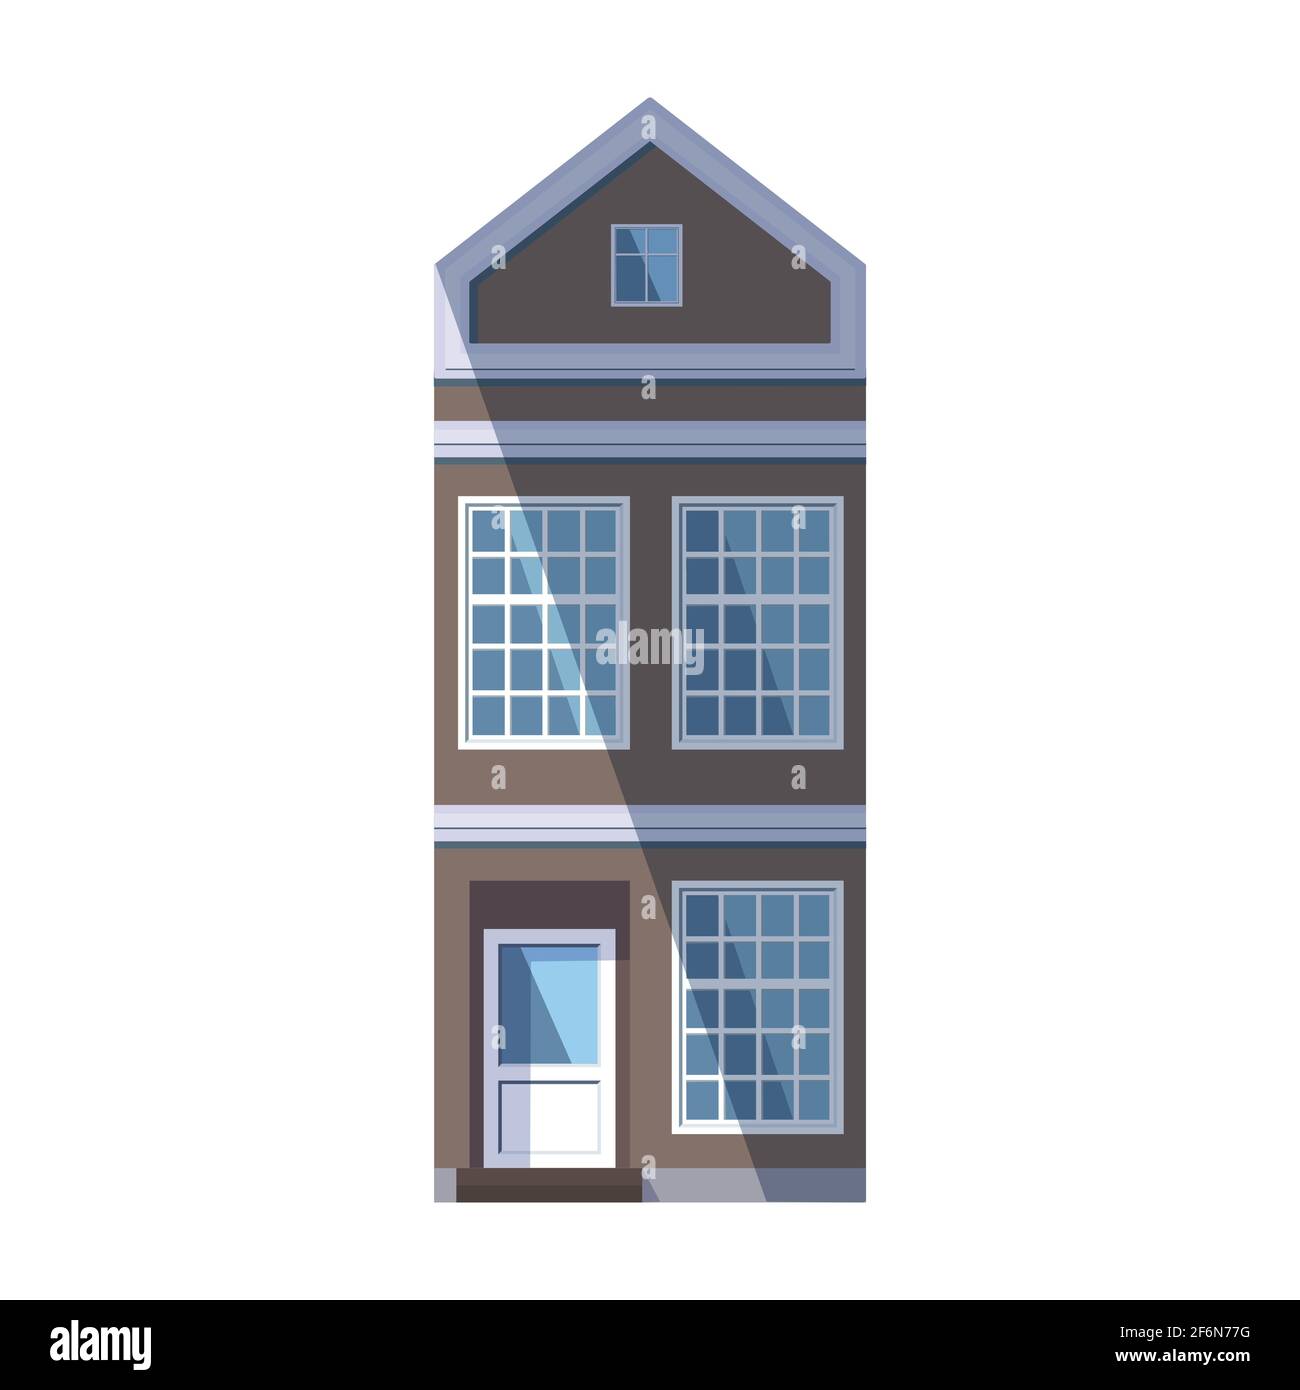 European brown old house in the traditional Dutch town style with a gable roof, square attic window and large loft-style windows. Vector illustration Stock Vector